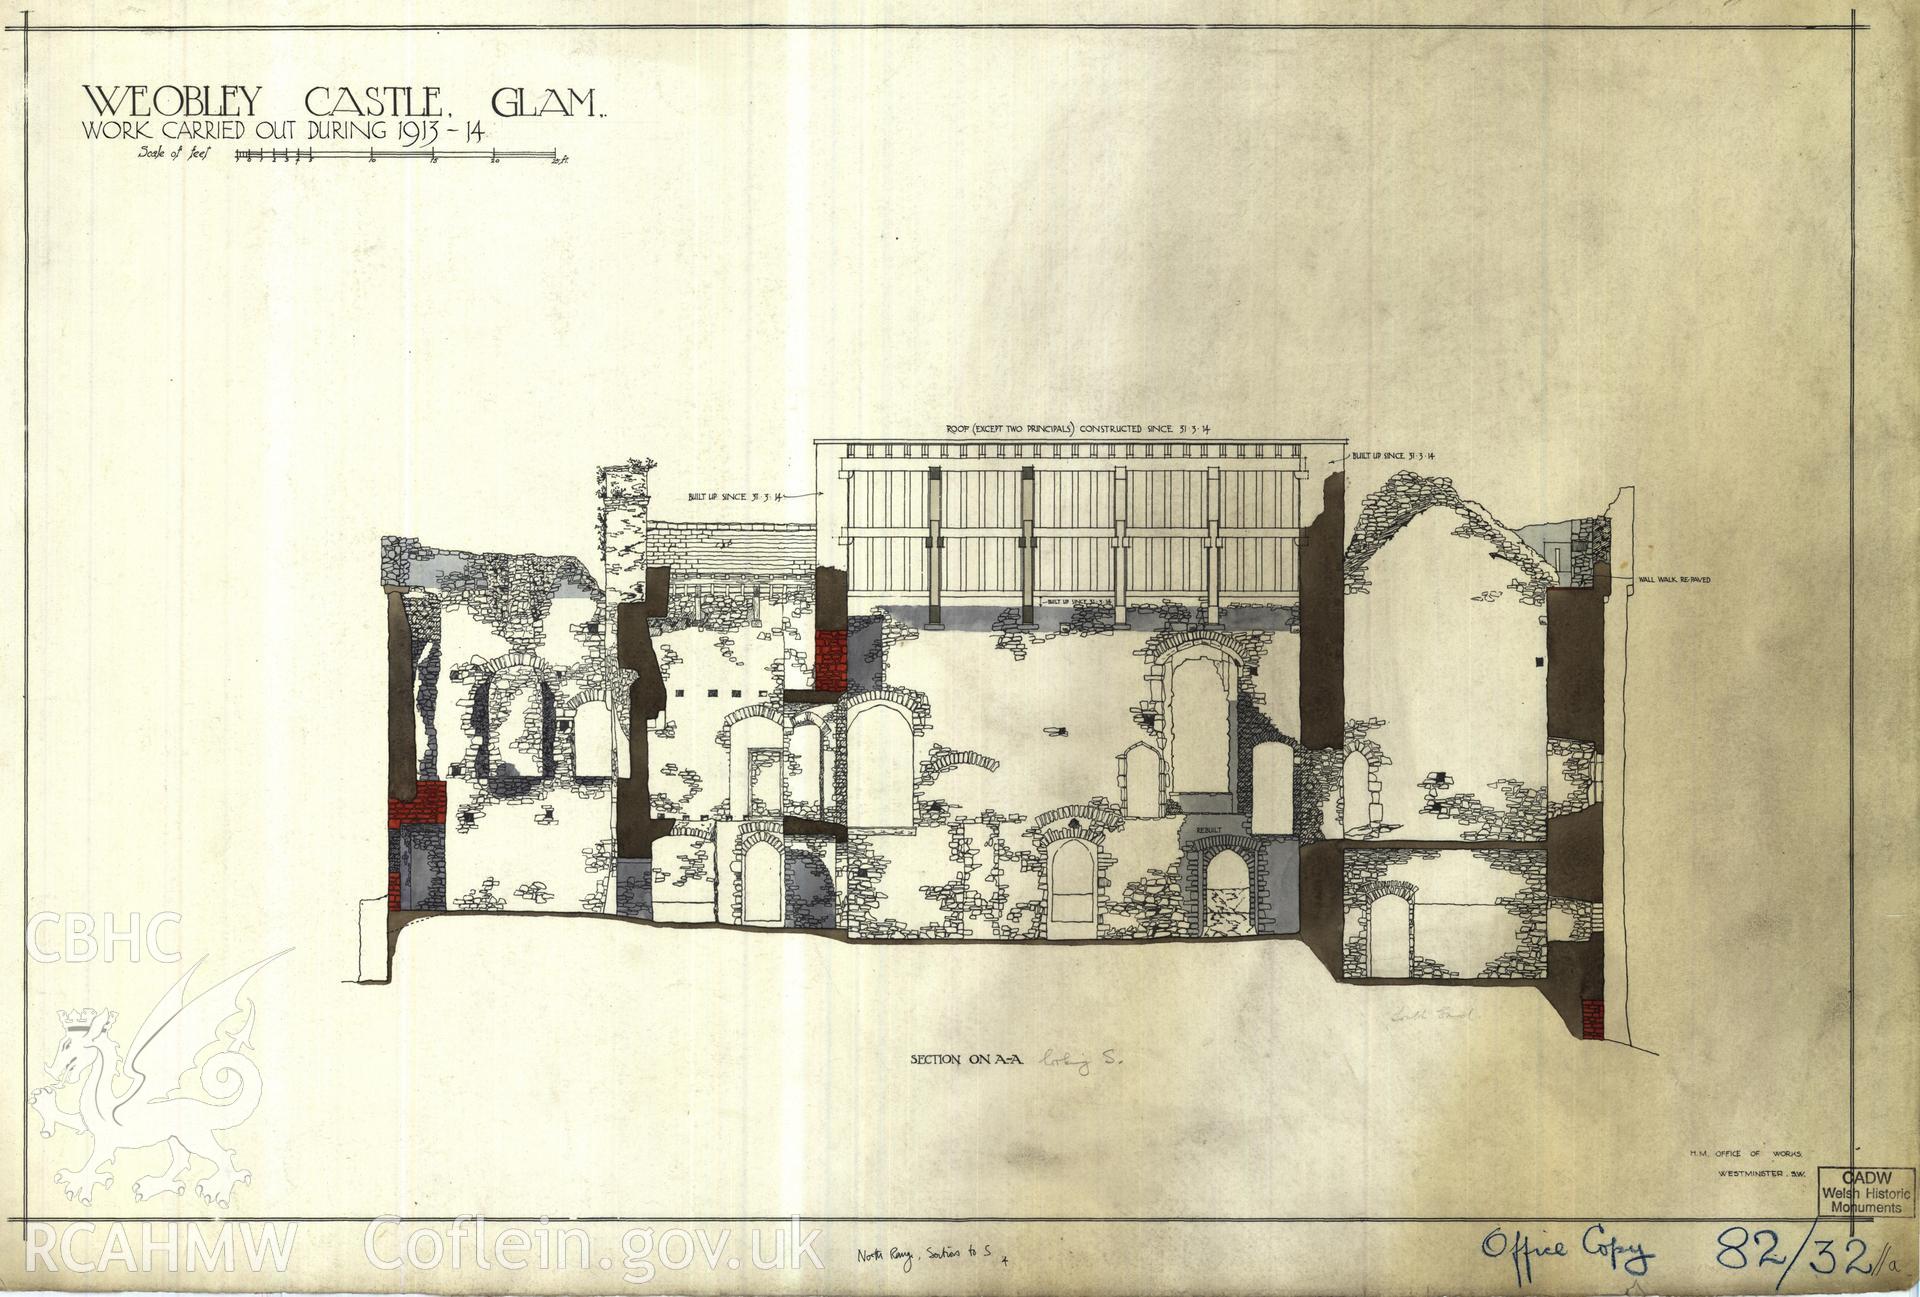 Cadw guardianship monument drawing of Weobley Castle. N range section to S, print. Cadw Ref. No:82/32//a. Scale 1:48.